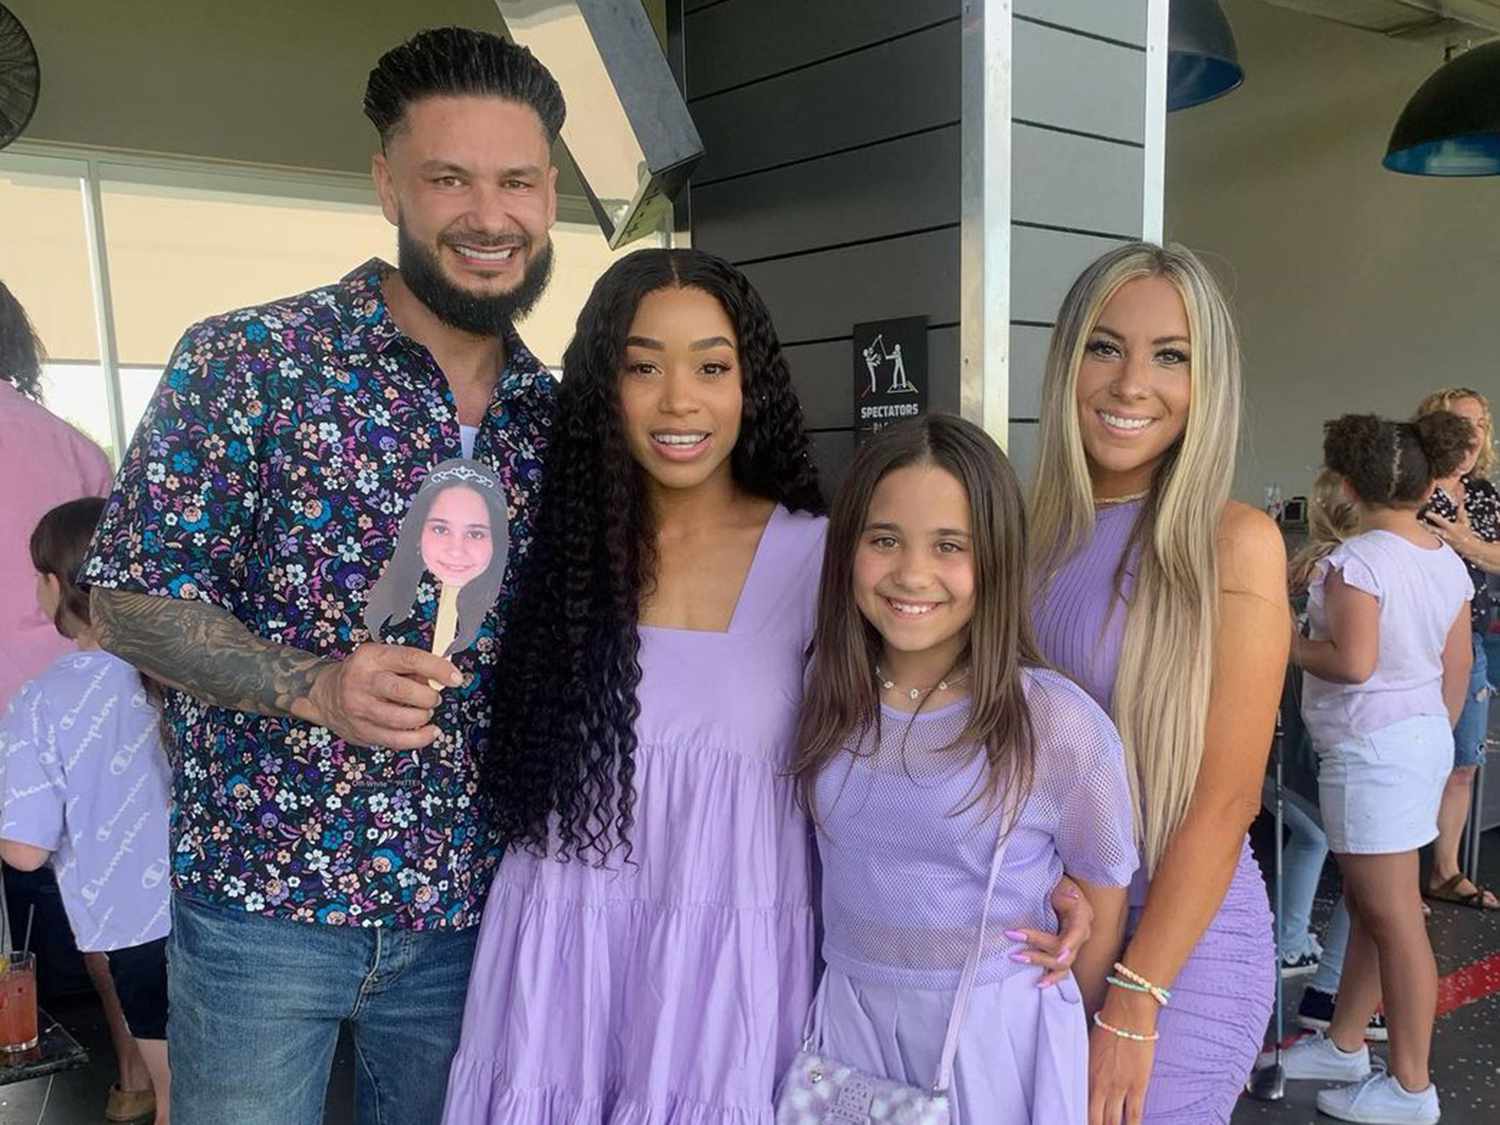 Pauly D Says His 10-Year-Old Daughter Is ‘Too Young’ for TikTok (Exclusive) [Video]